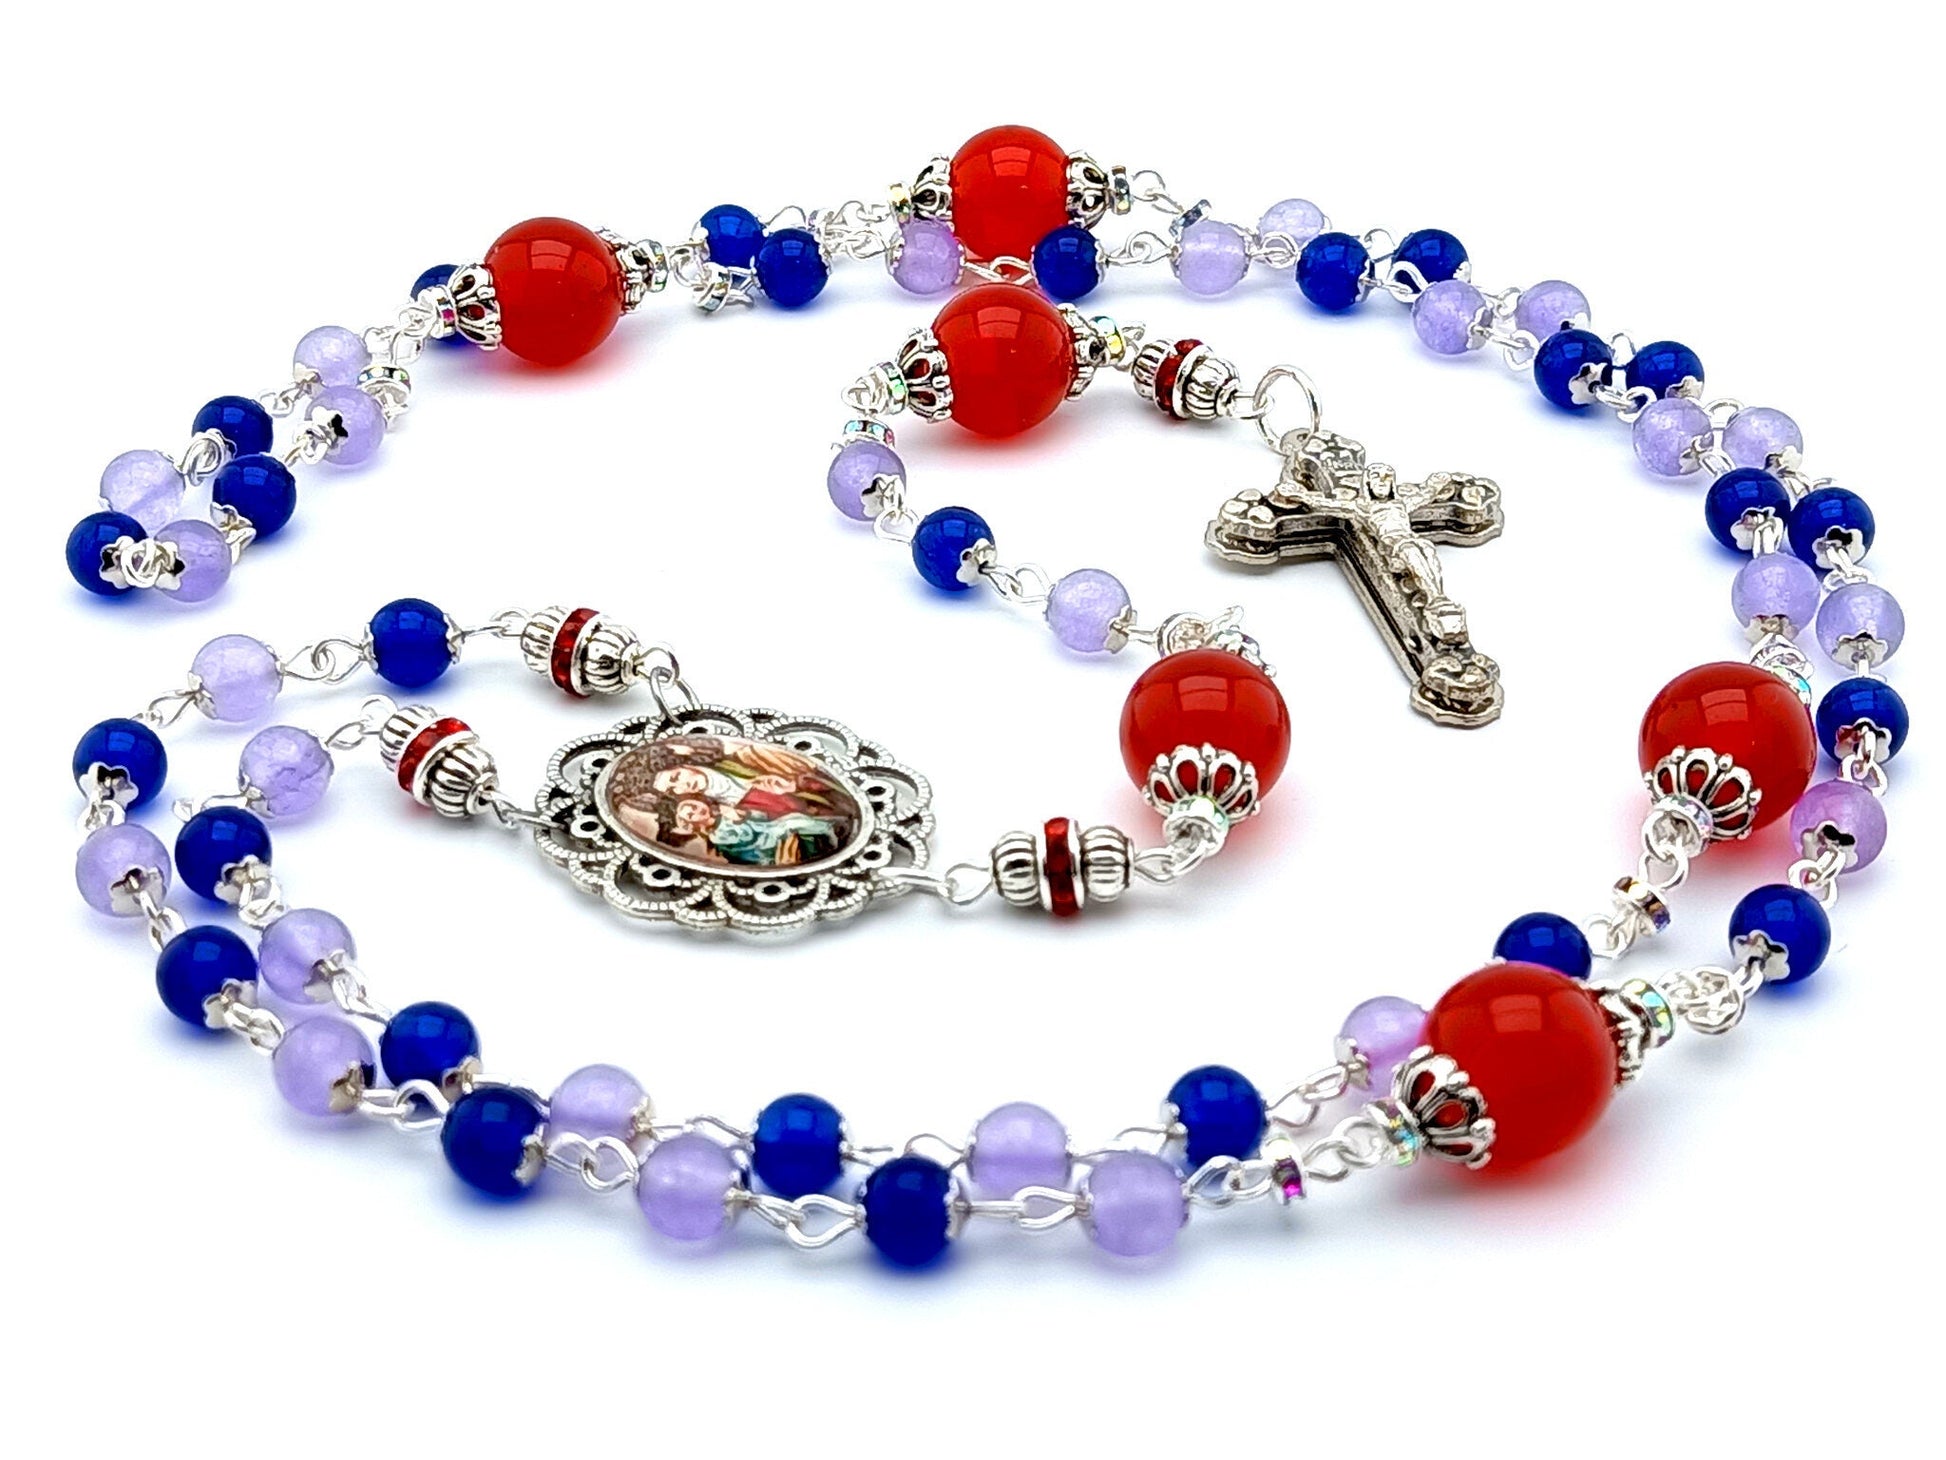 Saint Ann unique rosary beads with sapphire alexandrite and red jade beads, silver hearts crucifix and picture centre medal.